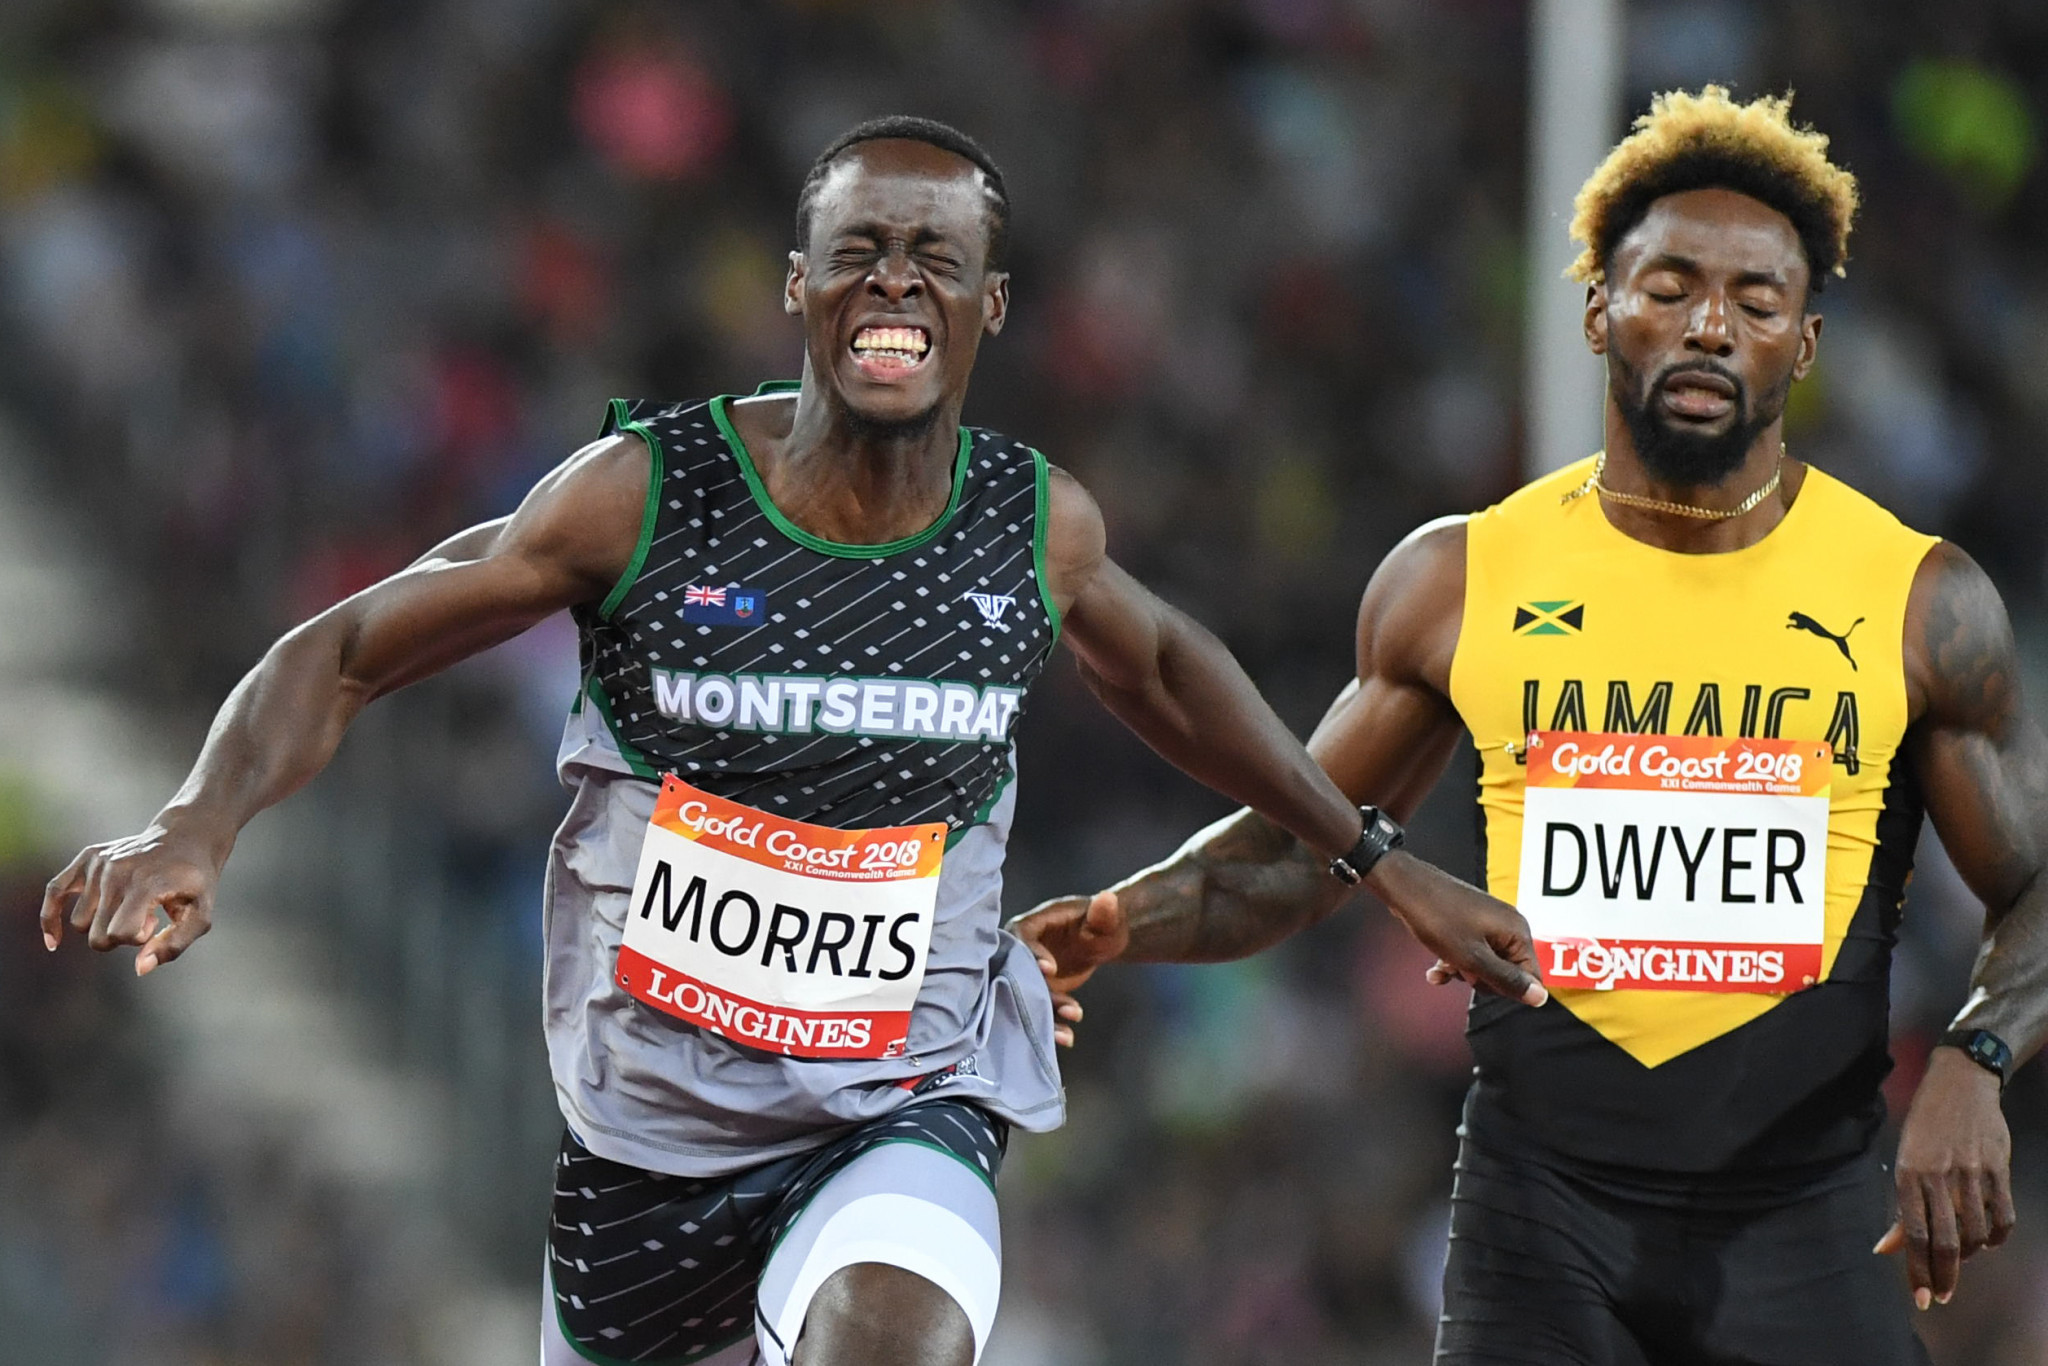 Julius Morris won his heat in the 200 metres at the Gold Coast 2018 Commonwealth Games ©Getty Images